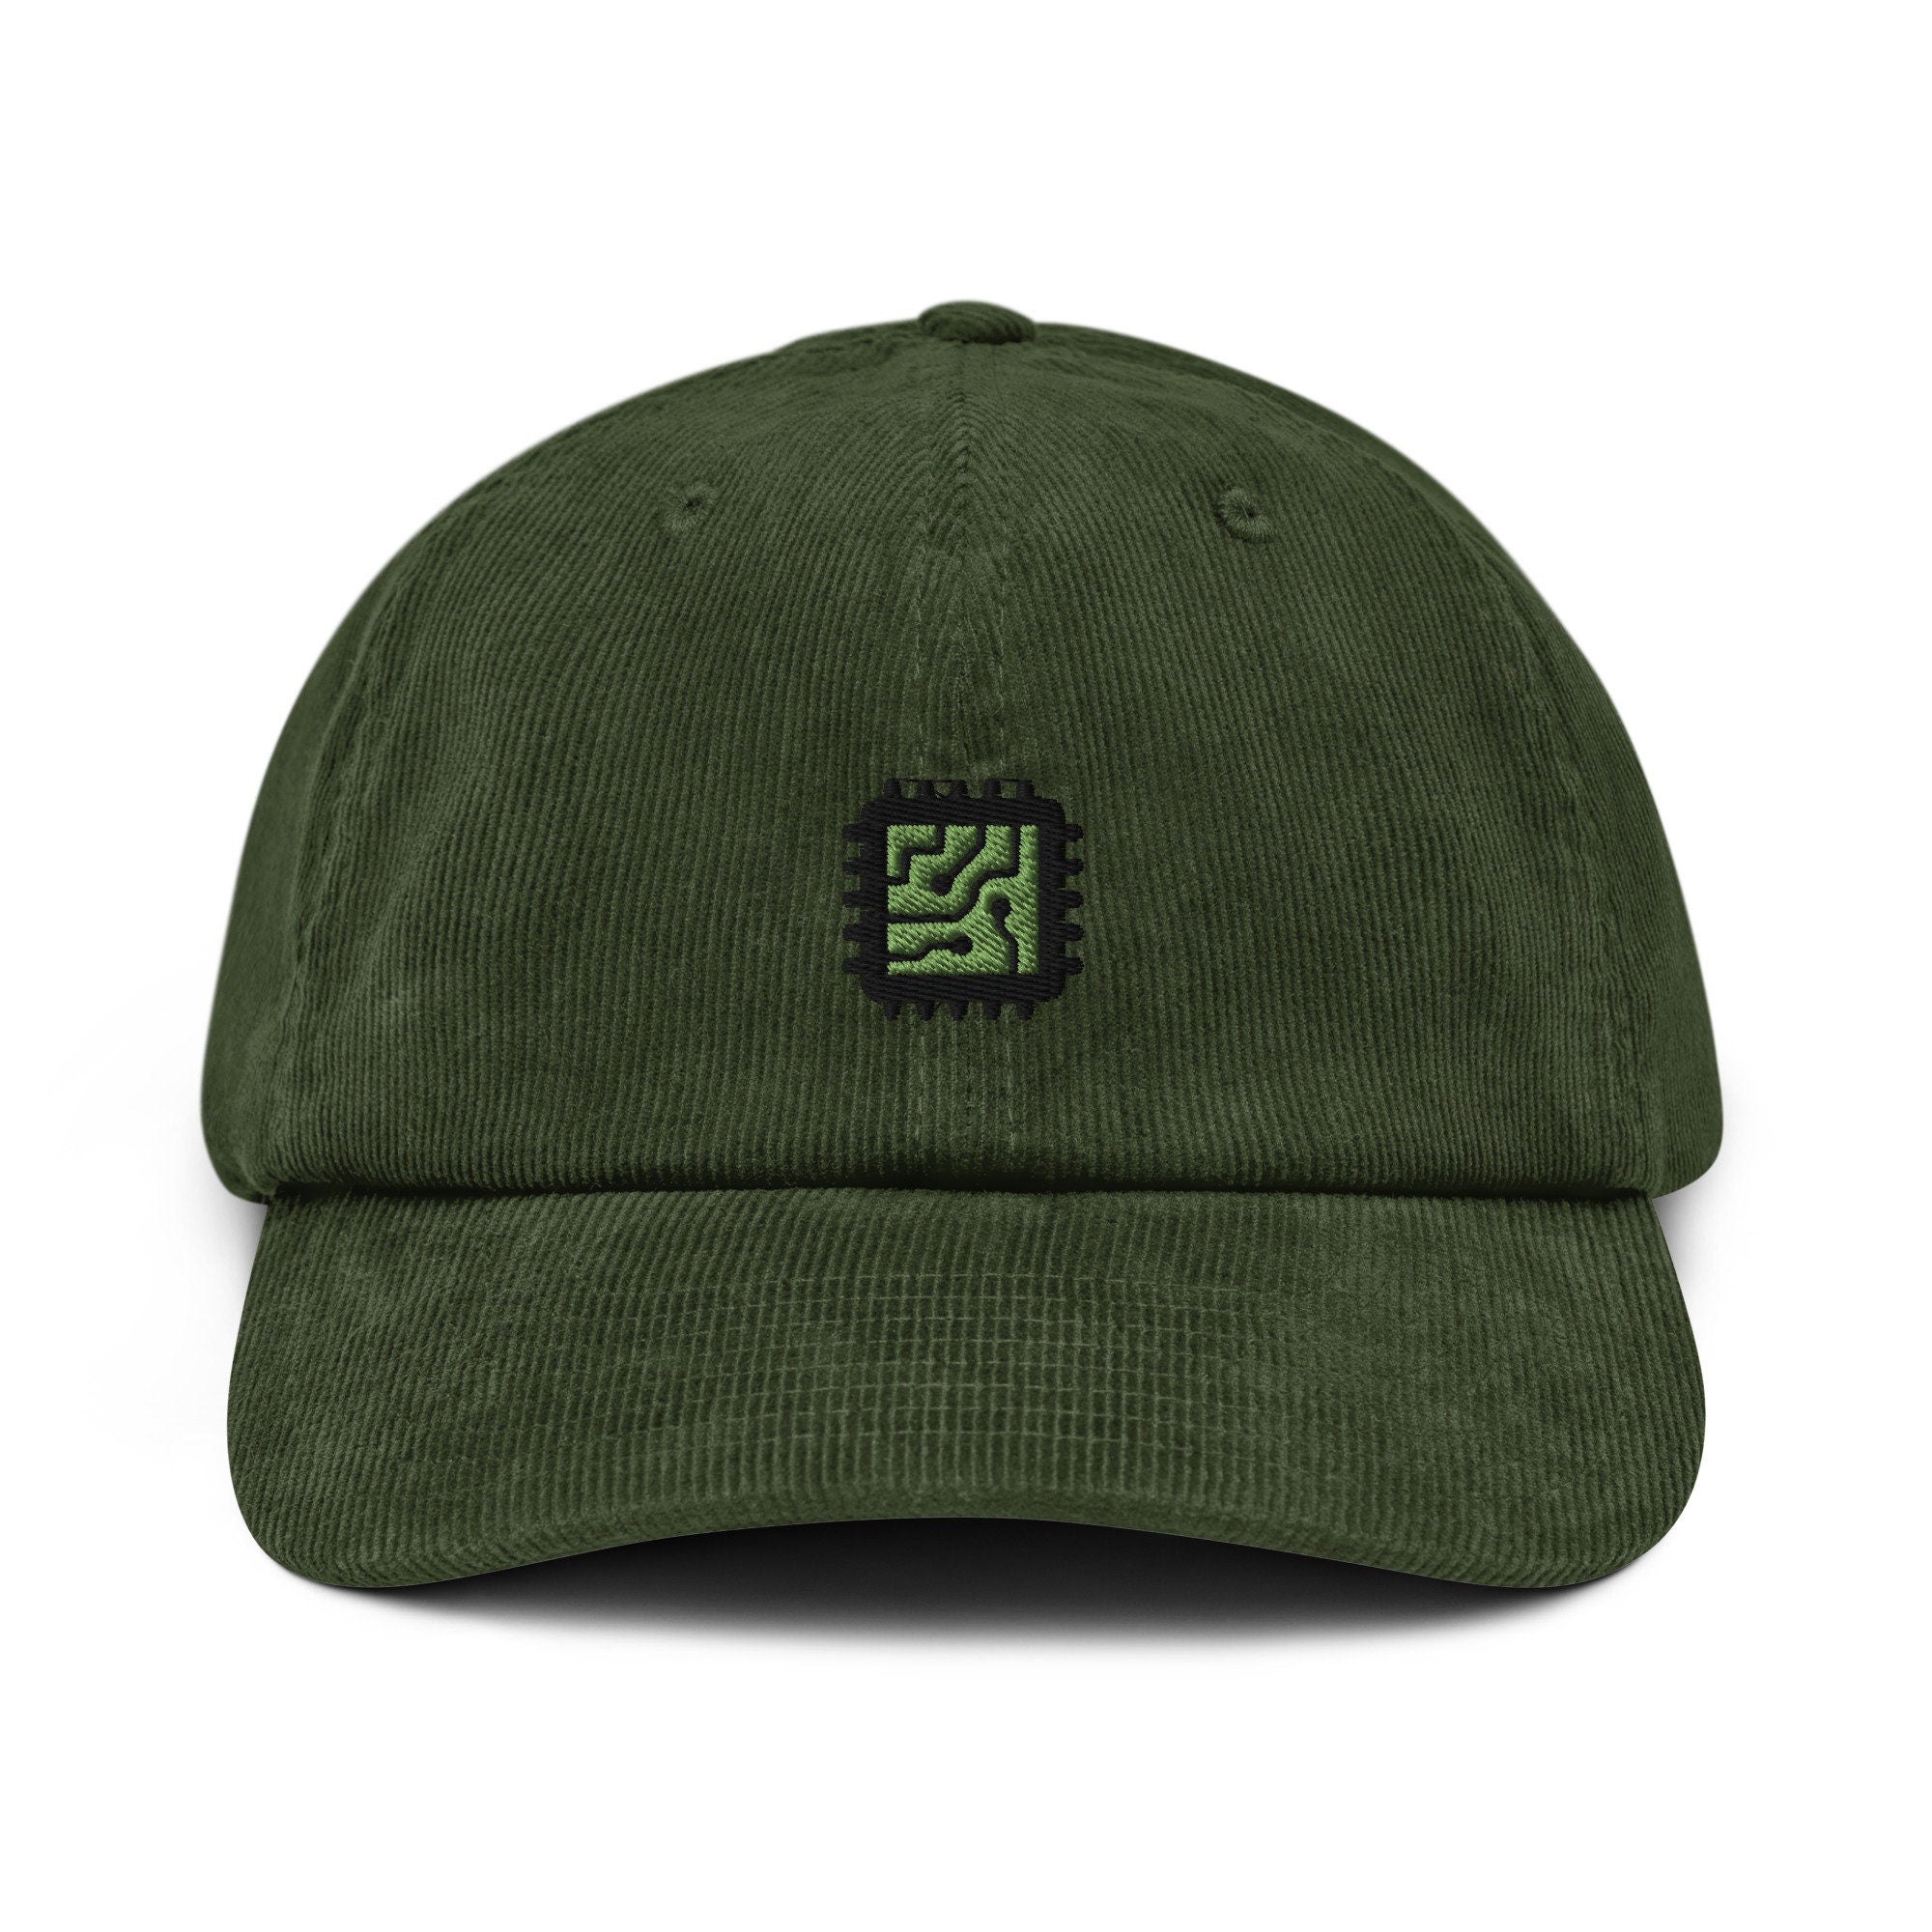 Computer Chip Corduroy Hat, Handmade Embroidered Corduroy Dad Cap - Multiple Colors